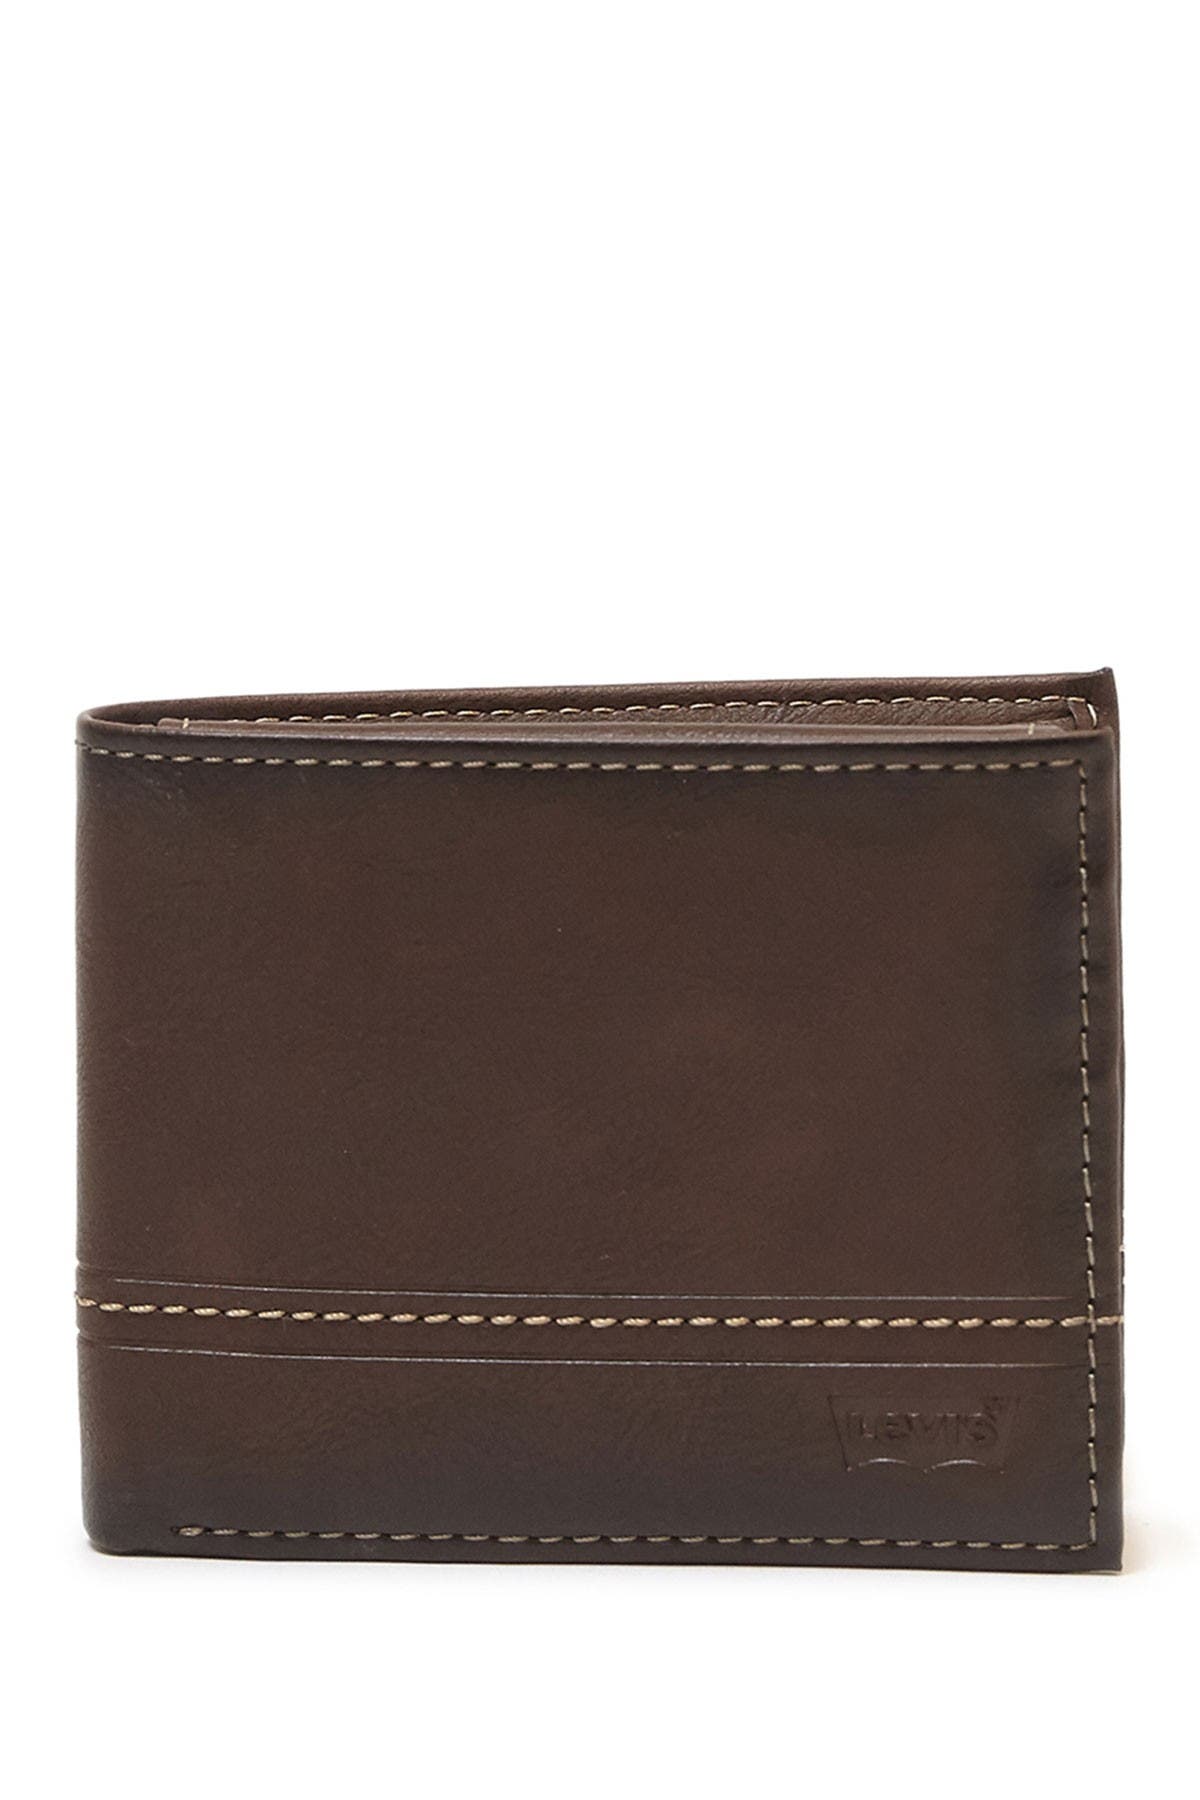 Levi's Knox Passcase Wallet In Brown